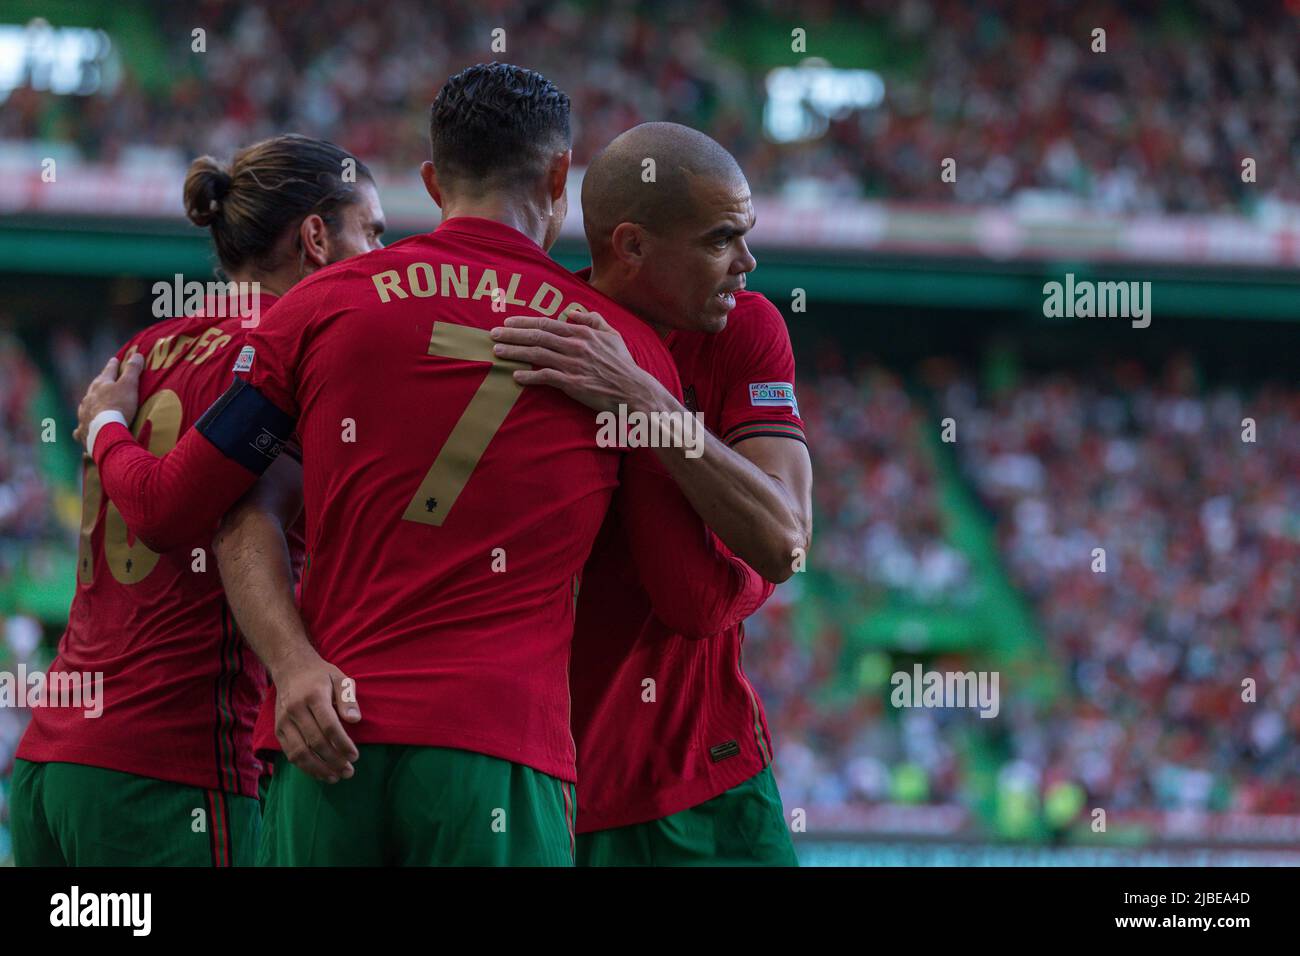 June 05, 2022. Lisbon, Portugal. Portugal's and Manchester United forward Cristiano Ronaldo (7) celebrating with Portugal's and Wolverhampton midfielder Ruben Neves (18) and PortugalÕs and Porto defender Pepe (3) after scoring a goal during the UEFA Nations League Final Tournament between Portugal and Switzerland Credit: Alexandre de Sousa/Alamy Live News Stock Photo